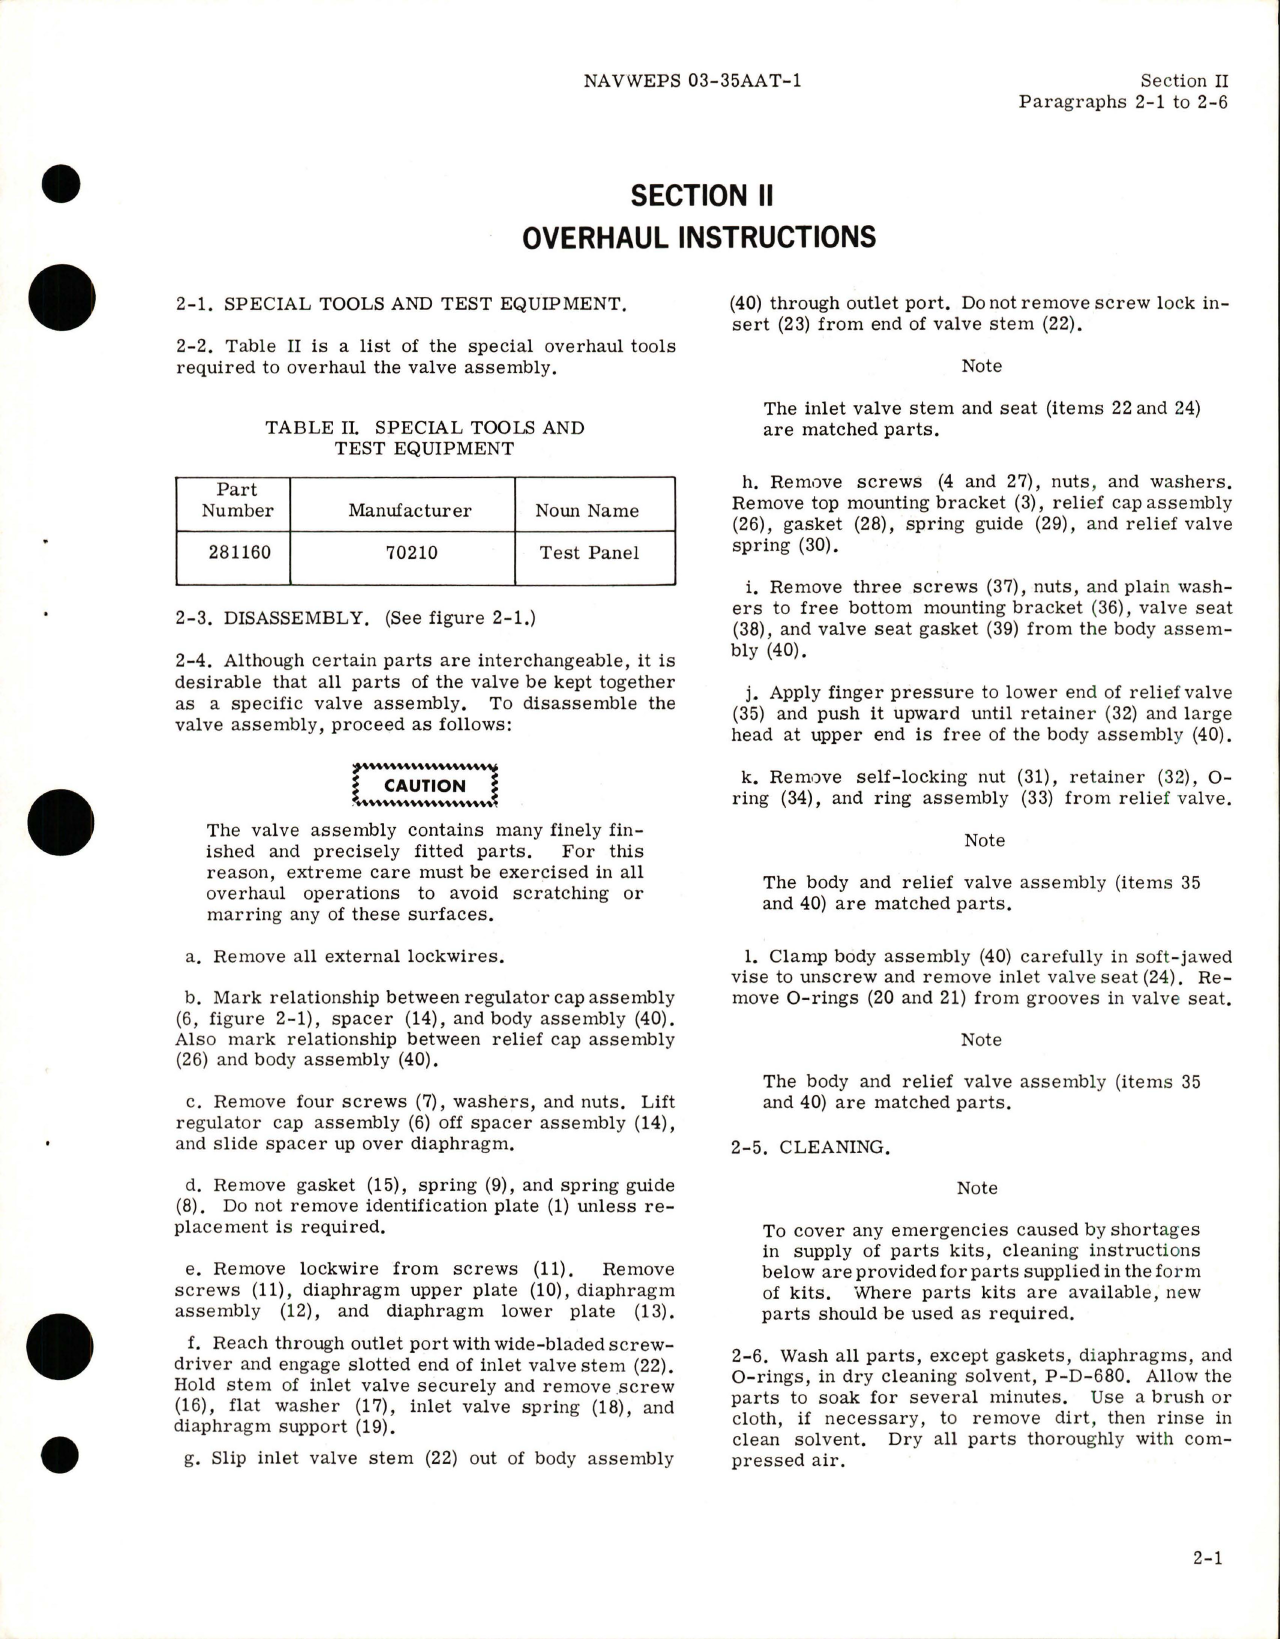 Sample page 7 from AirCorps Library document: Overhaul Instructions for Deicing Pressure Regulating and Relief Valve Assembly - Part A81C42 